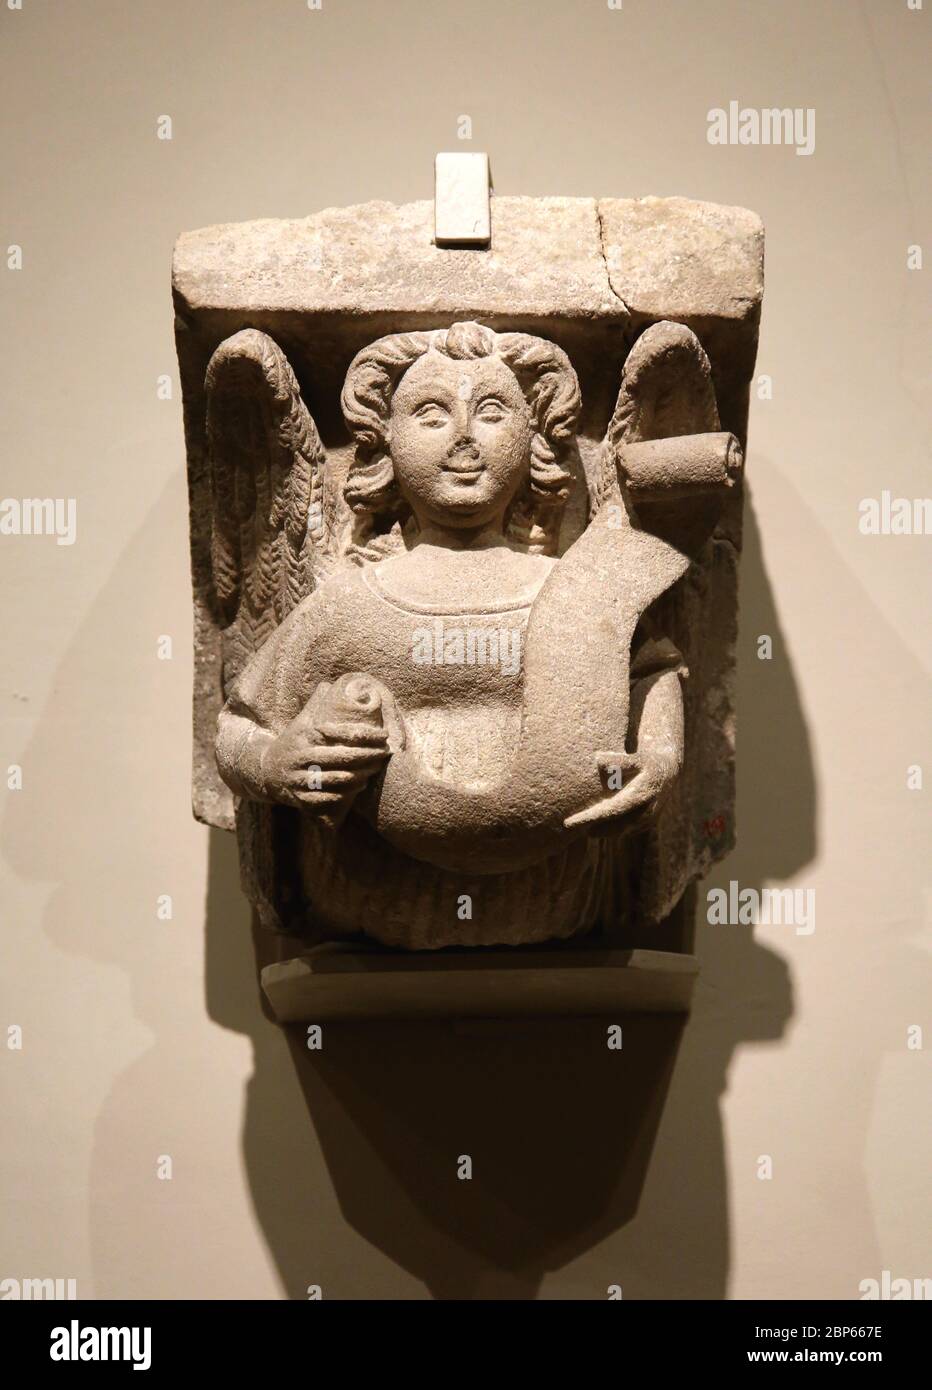 Carved corbel stone with angel 15 th century. Jordi de Deu ( c. 1363-1418) or workshop. Catalan Gothic art. Frederic Mares Museum, Barcelona. Stock Photo